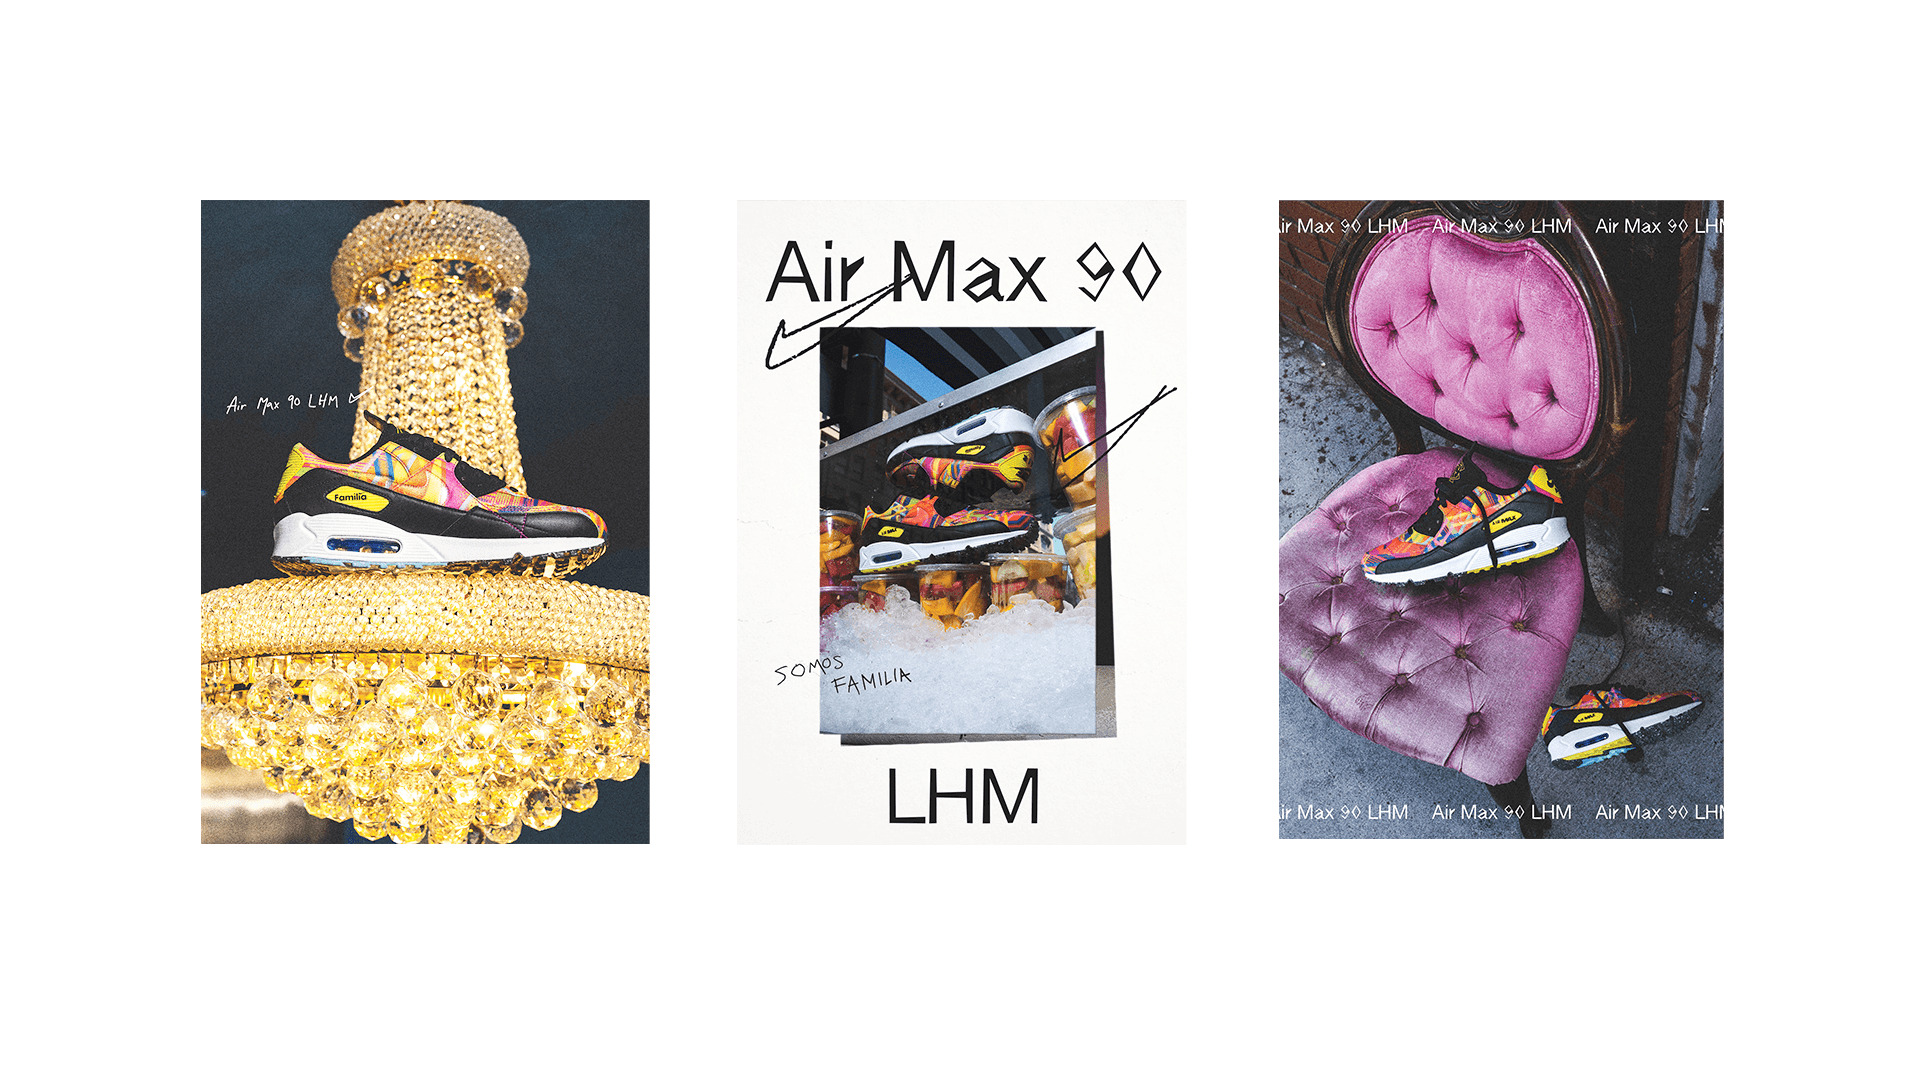 Air Max 90 LHM Somos Familia - Nike Air Max LHM displayed on gold chandelier, in freezer with fruit cups and on a purple chair